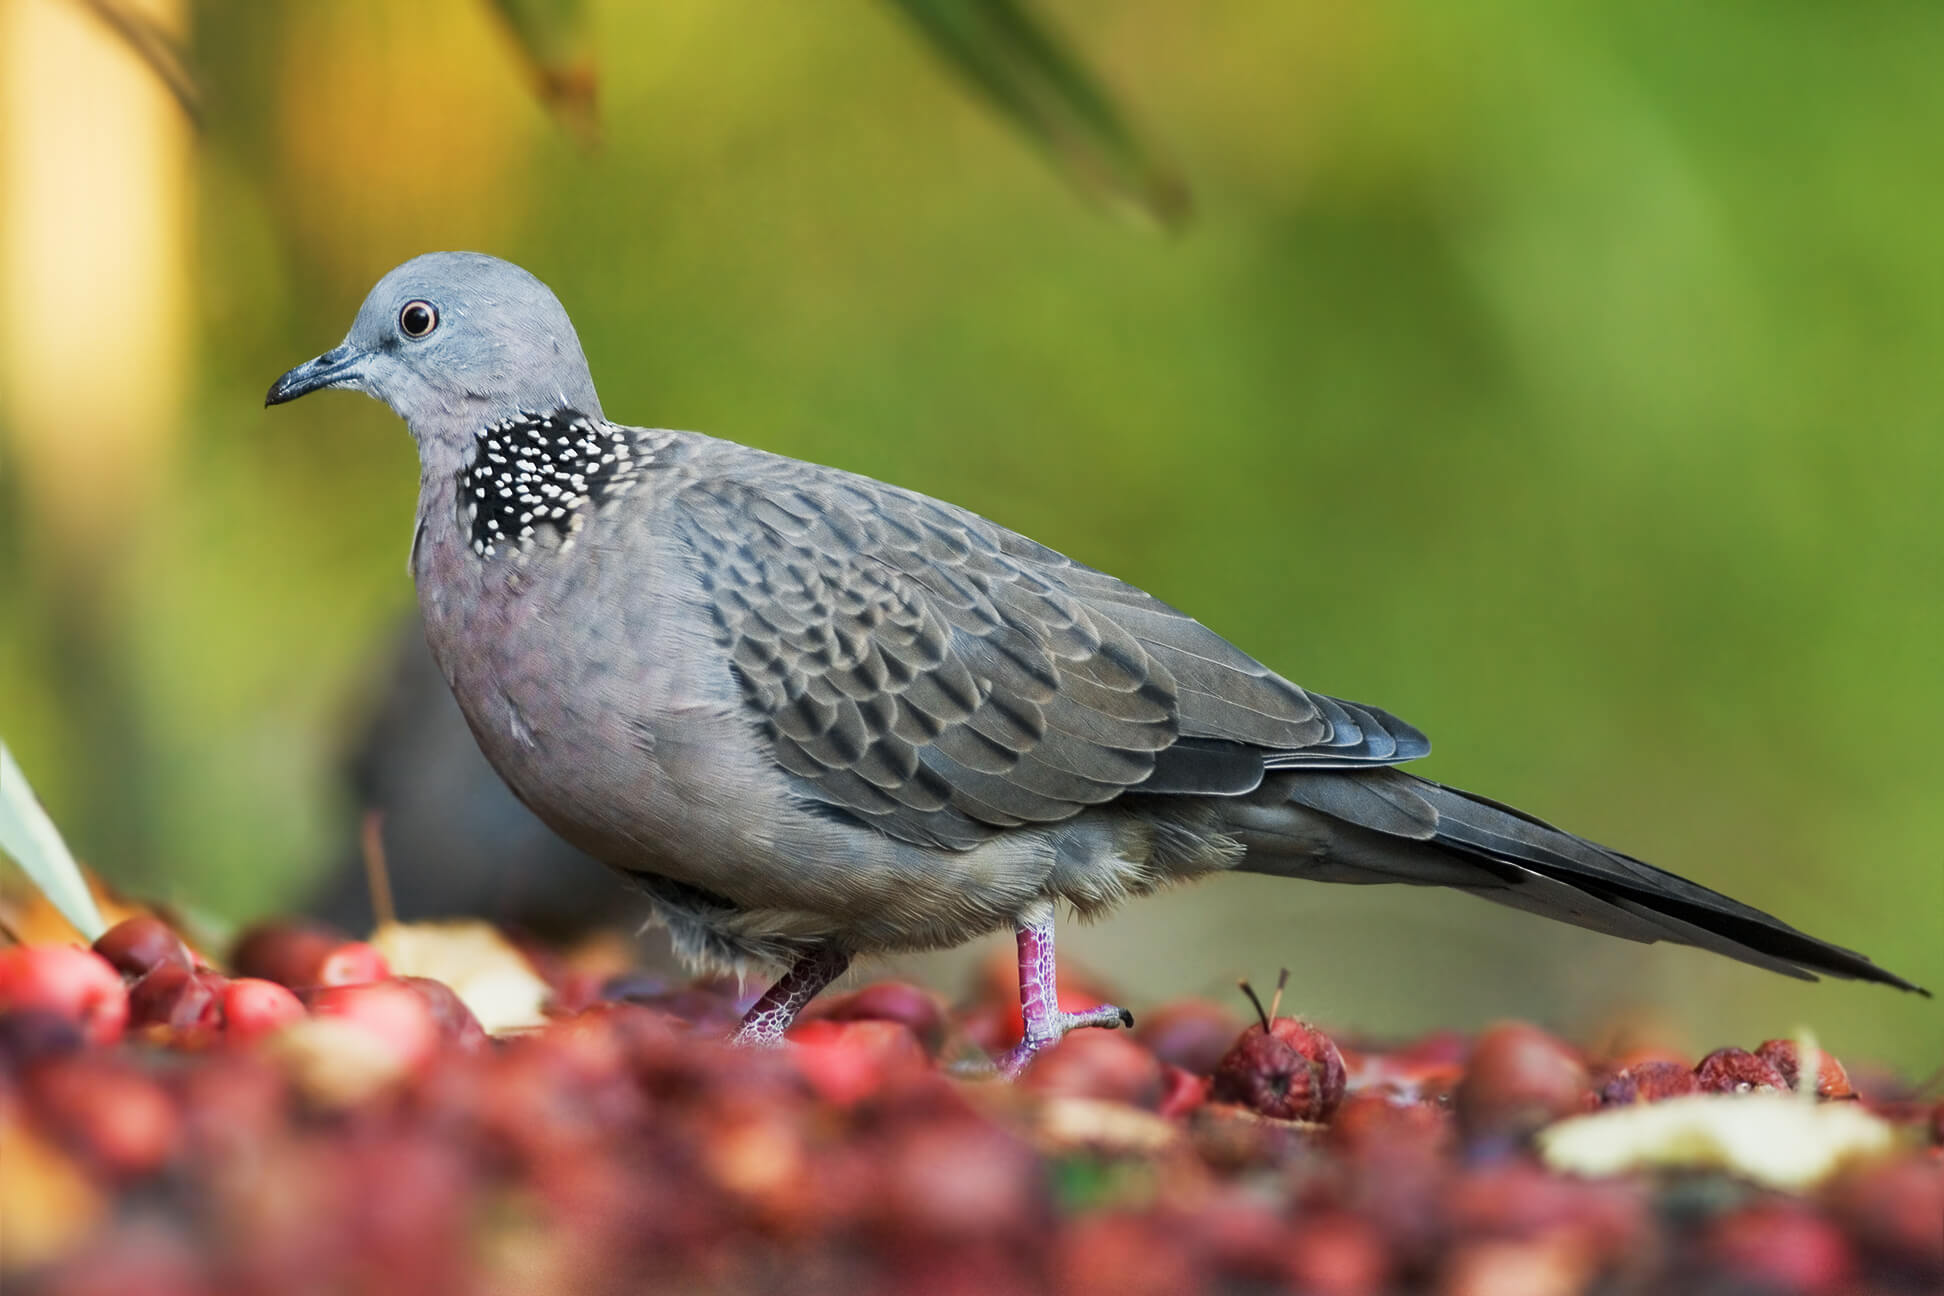 A spotted dove.